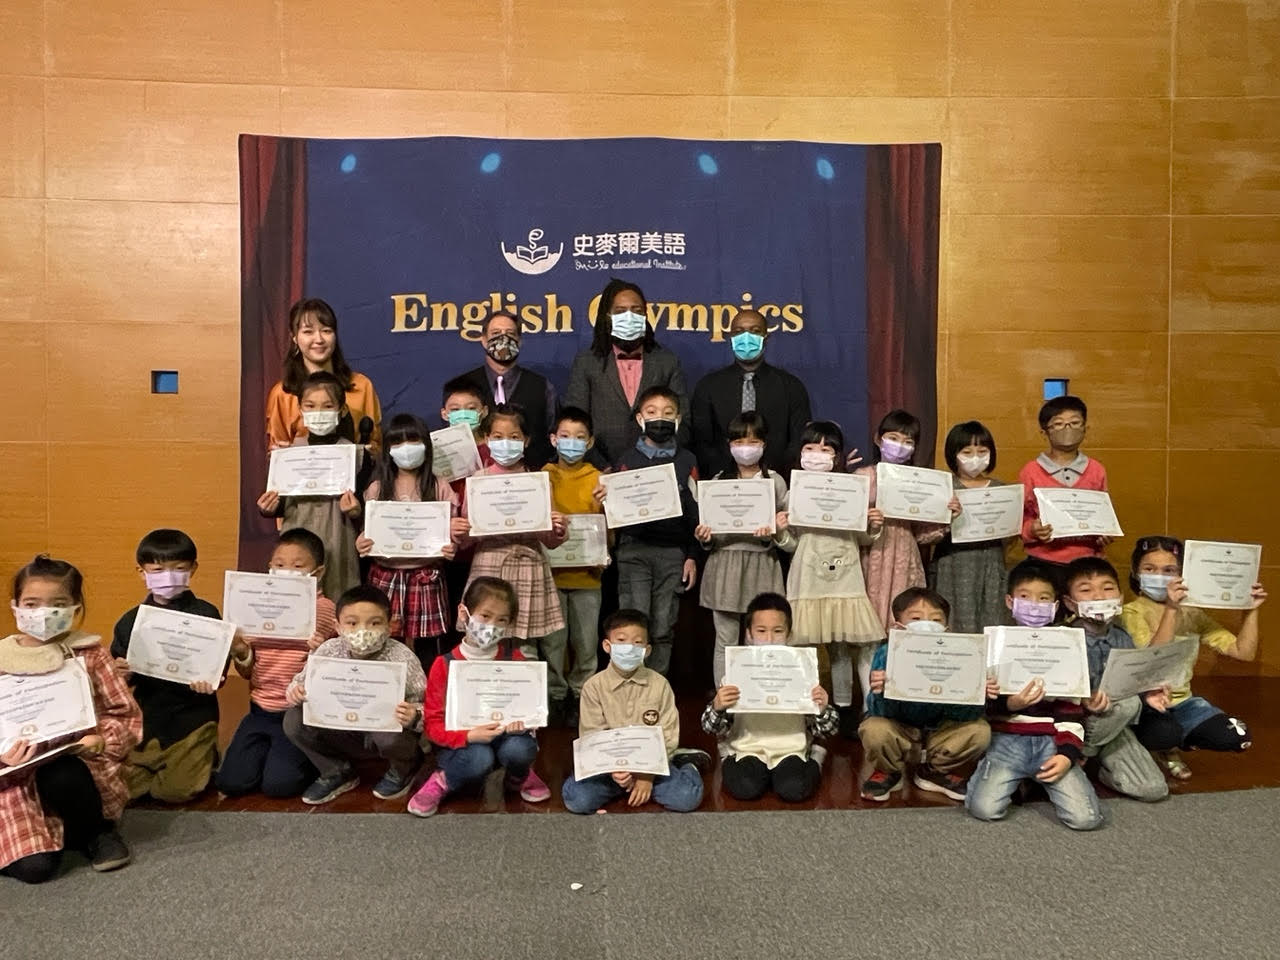 Teaching English and Living in Taiwan Jobs Available 教學工作, Smile Instutute, Luodong Branch EXPERIENCED Teachers REWARDED!  image